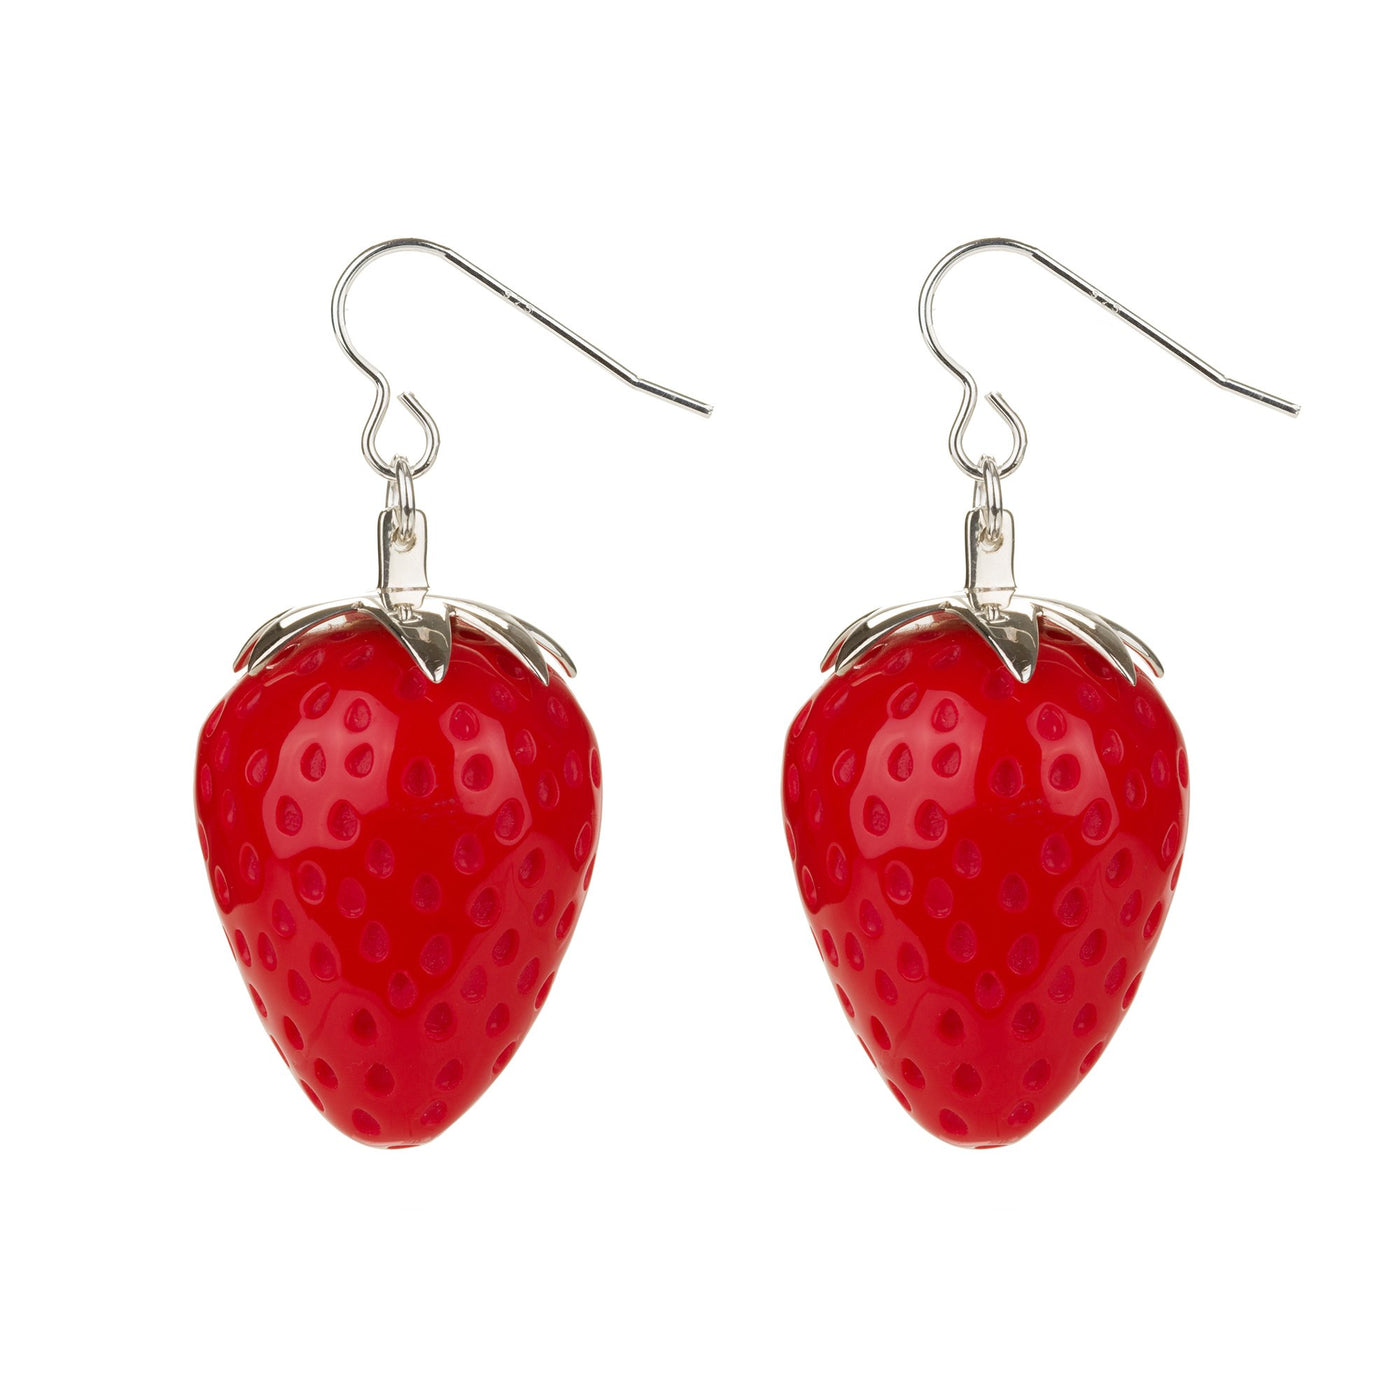 Tina Lilienthal Strawberry Earrings | Strawberry Earrings – Dollydagger